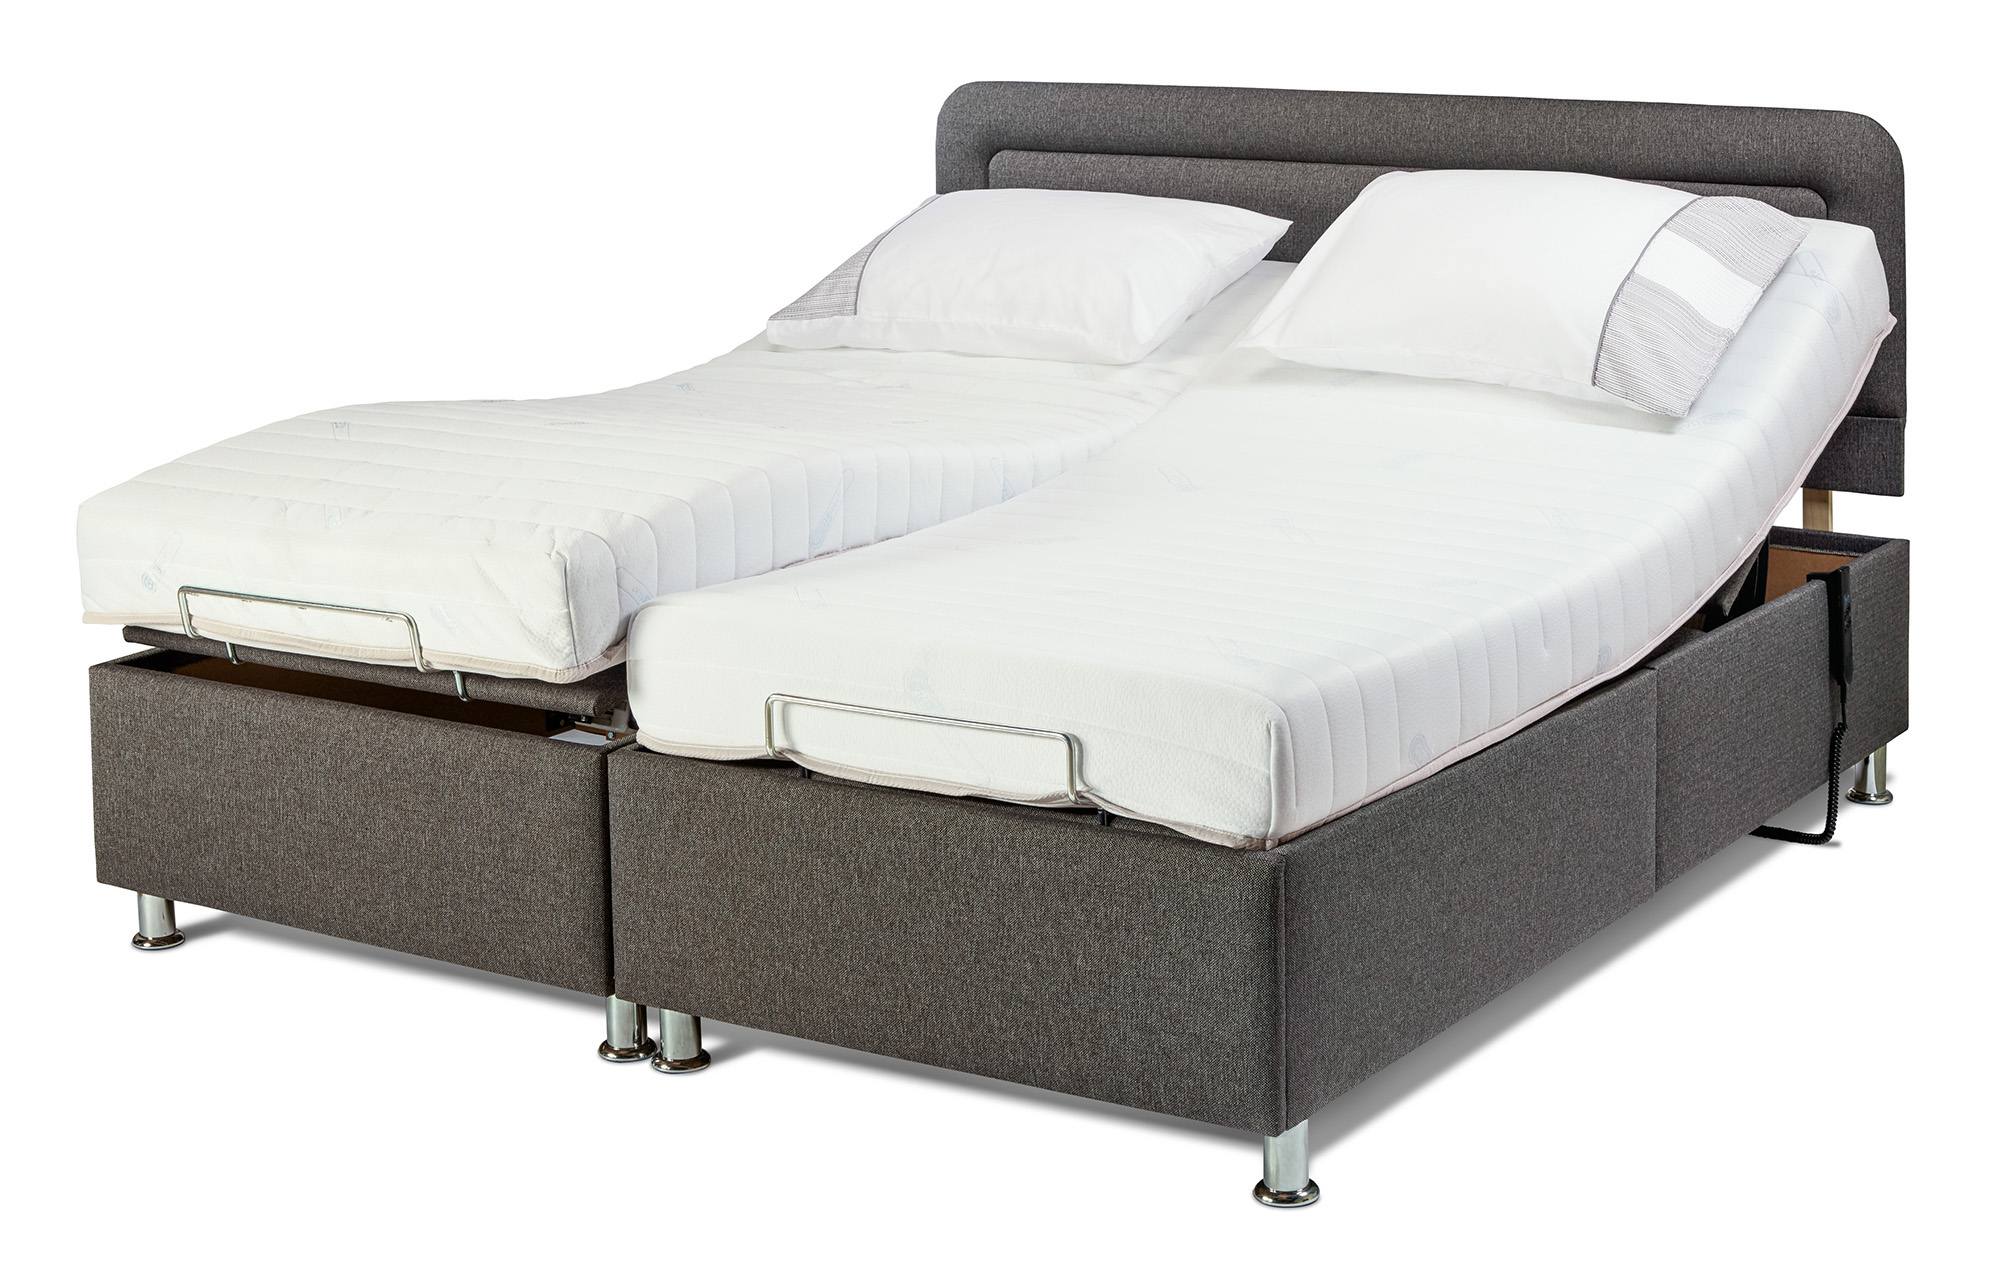 super king bed with separate mattresses